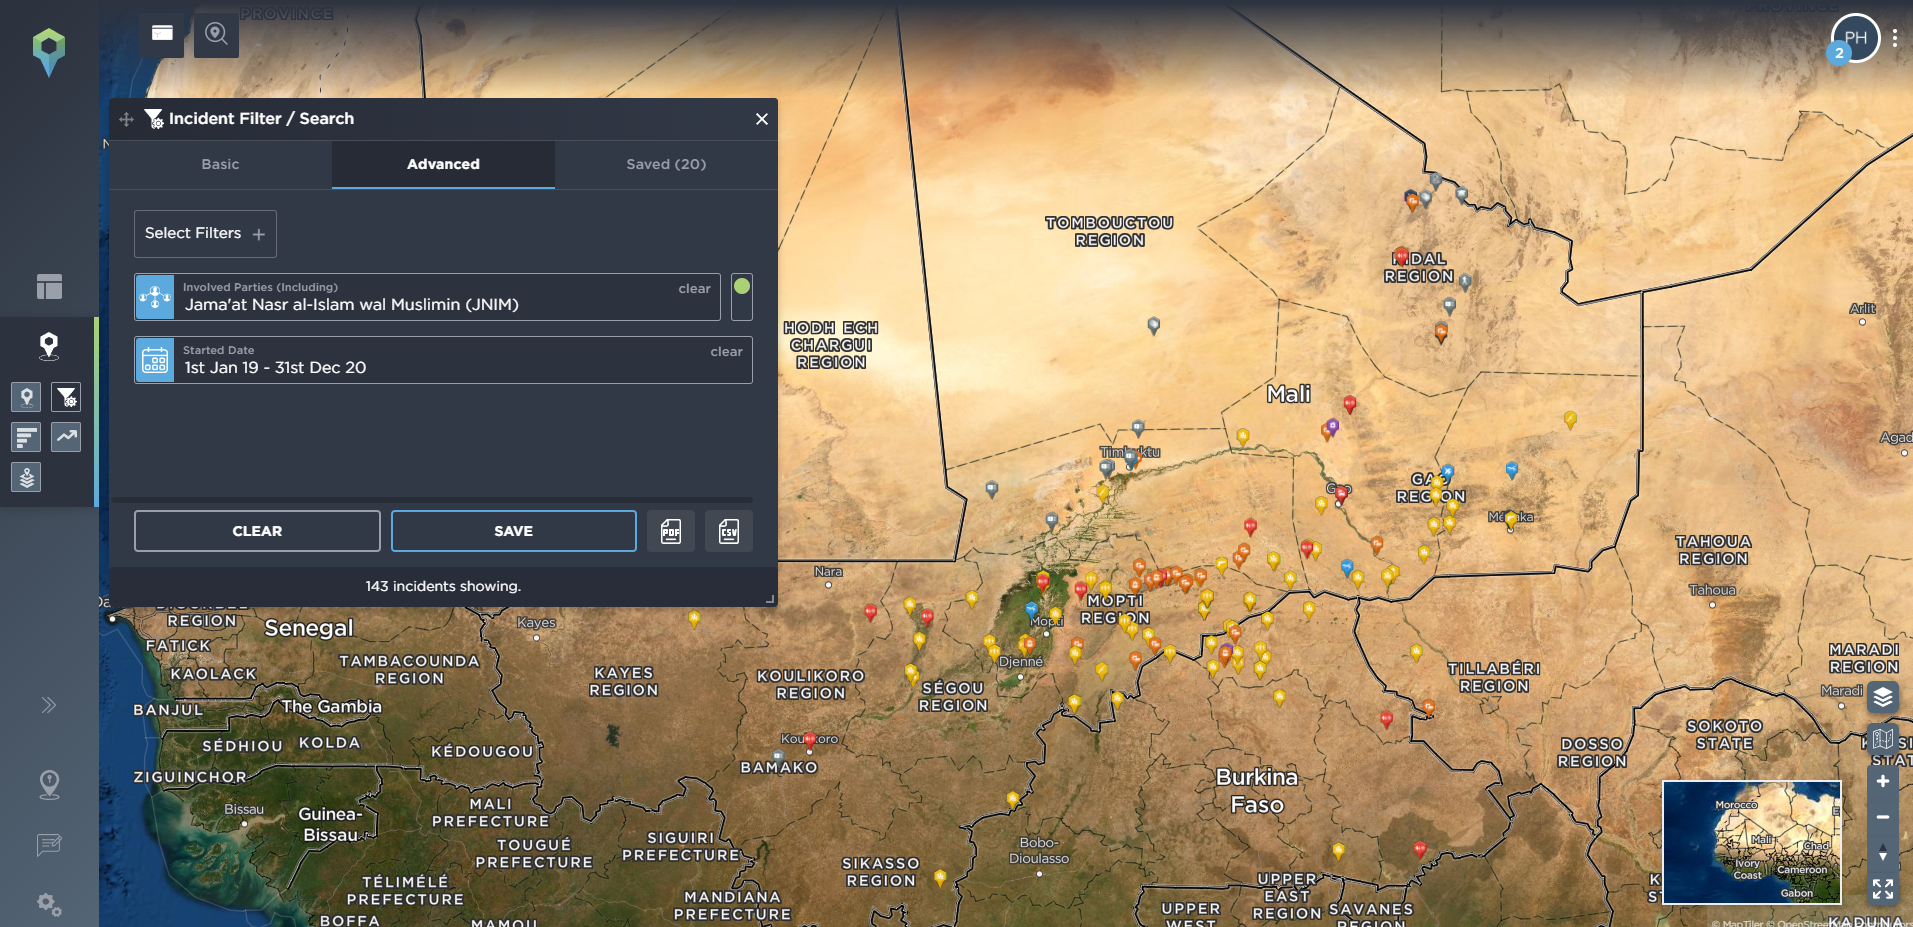 Tracking the spread of armed conflict activity of insurgent jihadist groups using threat intelligence software, involved party JNIM Al-Qaeda Sahel